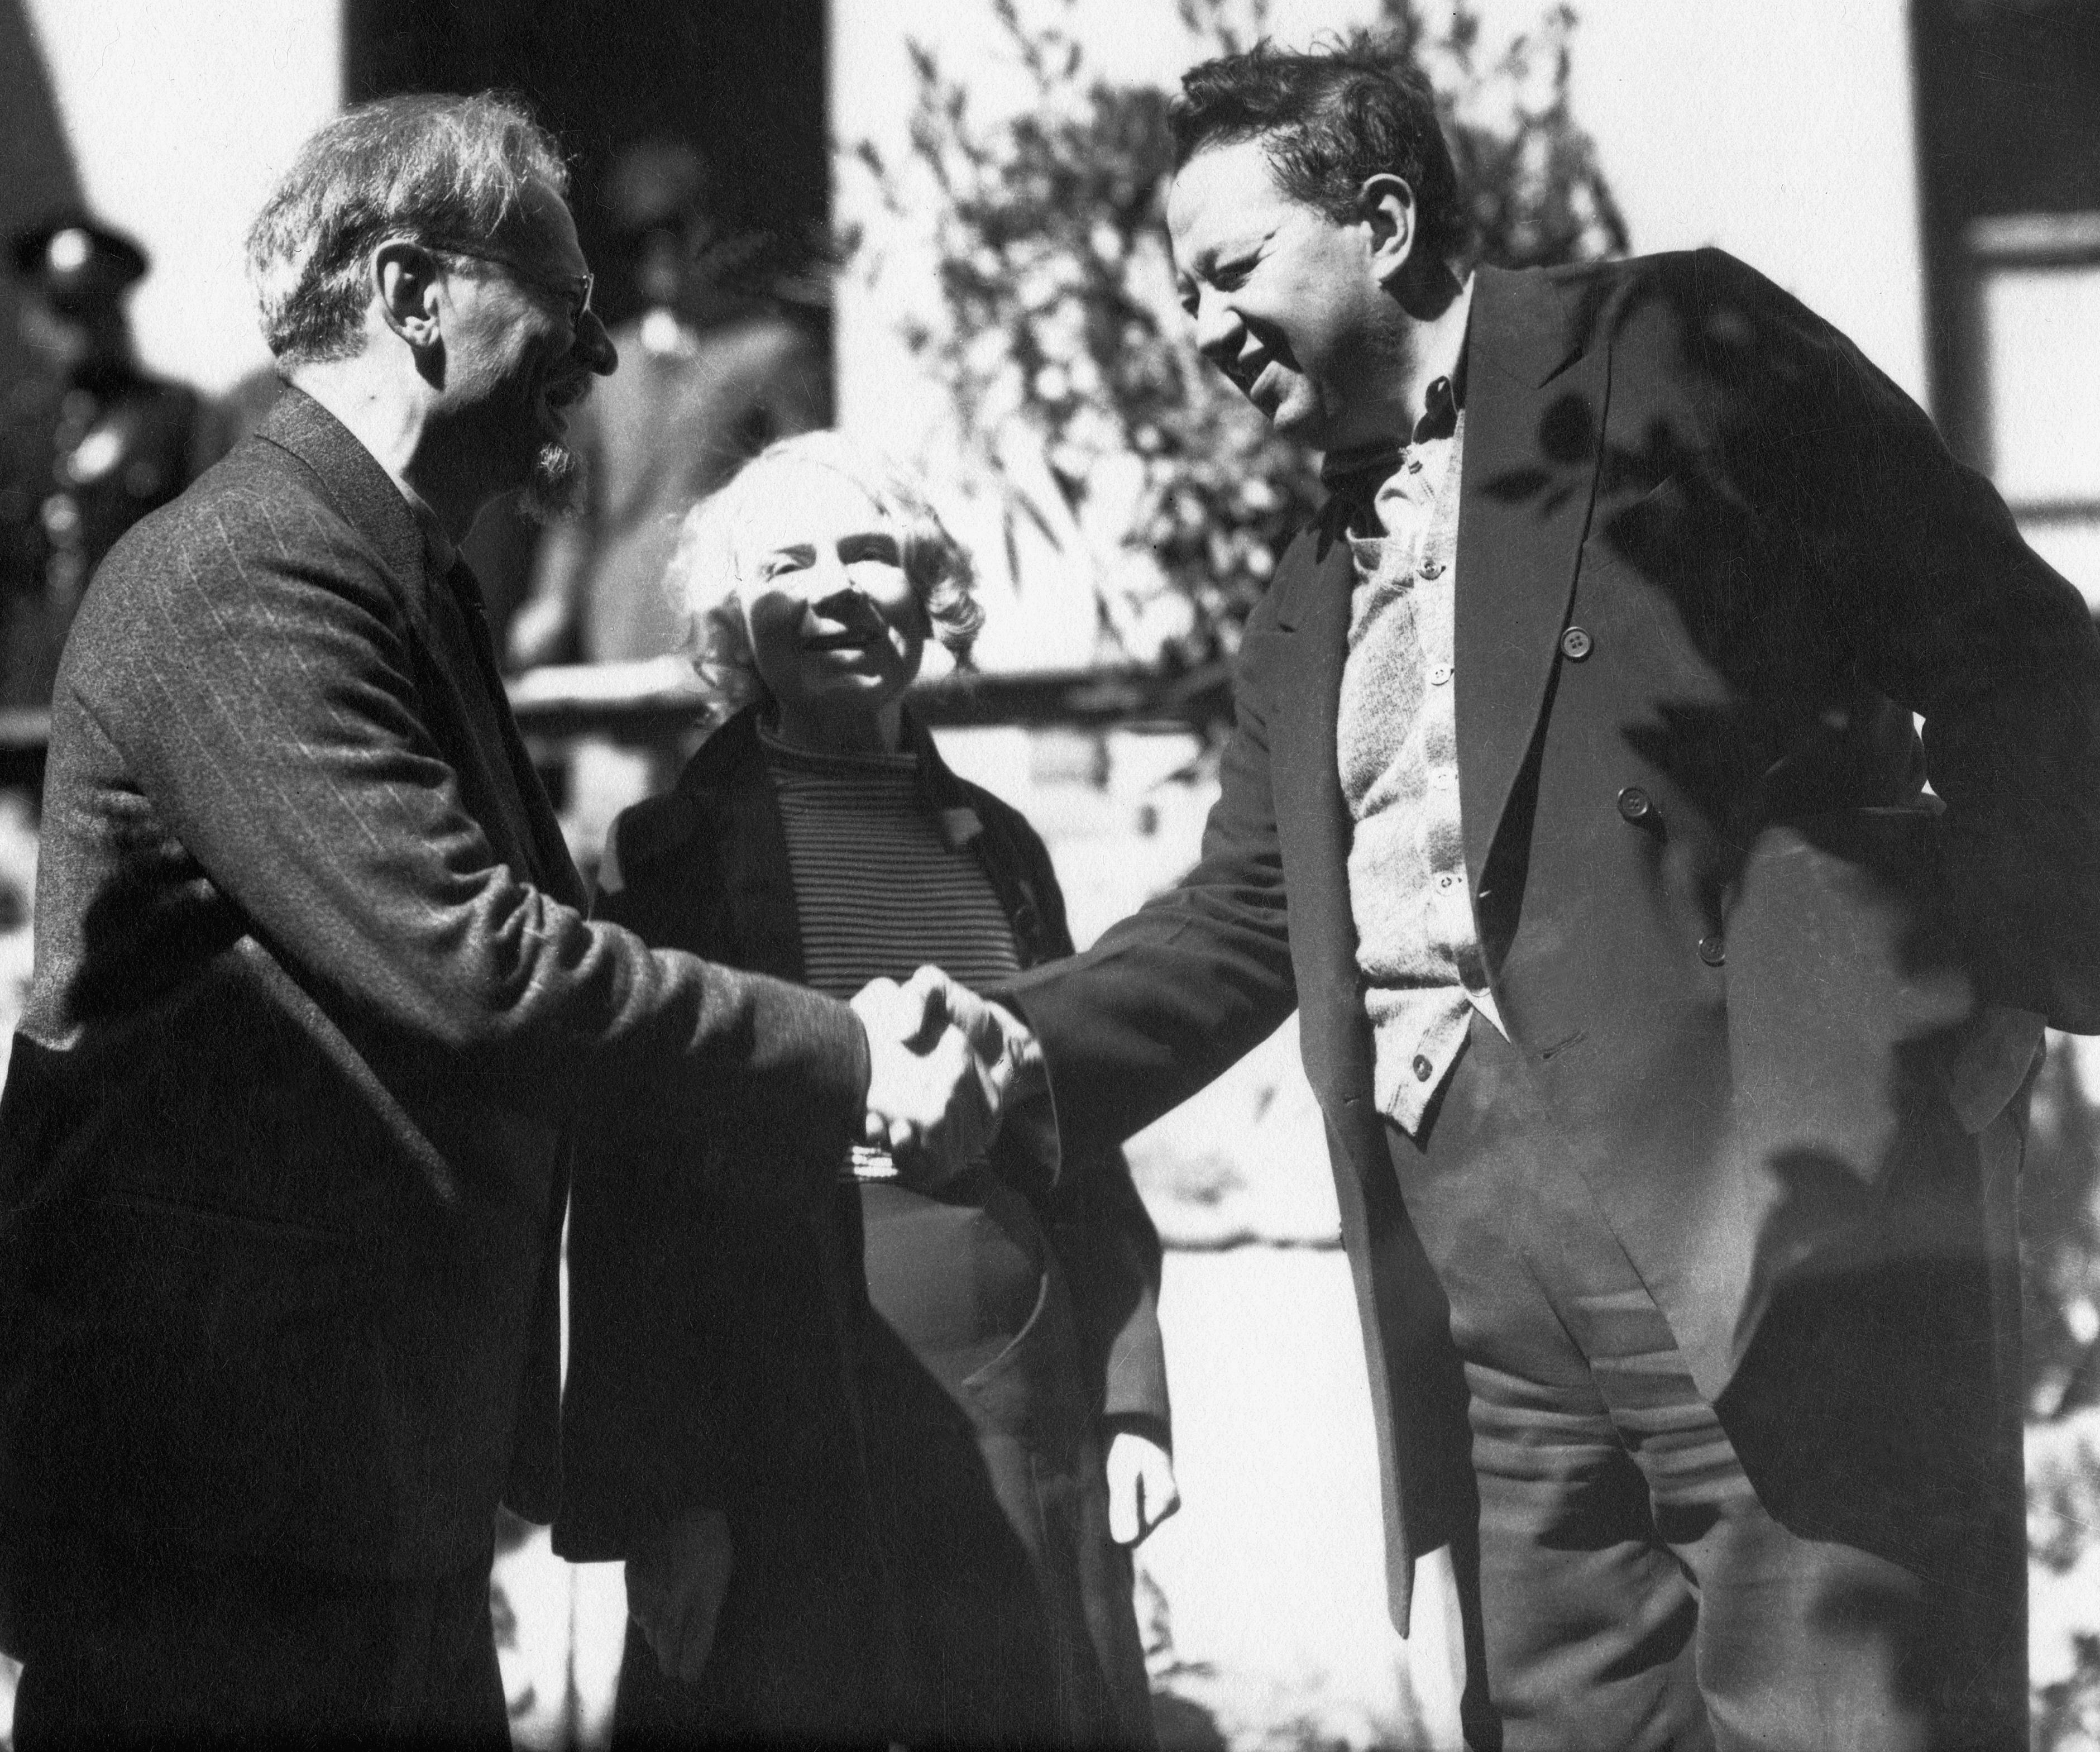 Black and white image of Trotsky and River shaking hands, with a smiling Sedova beside them